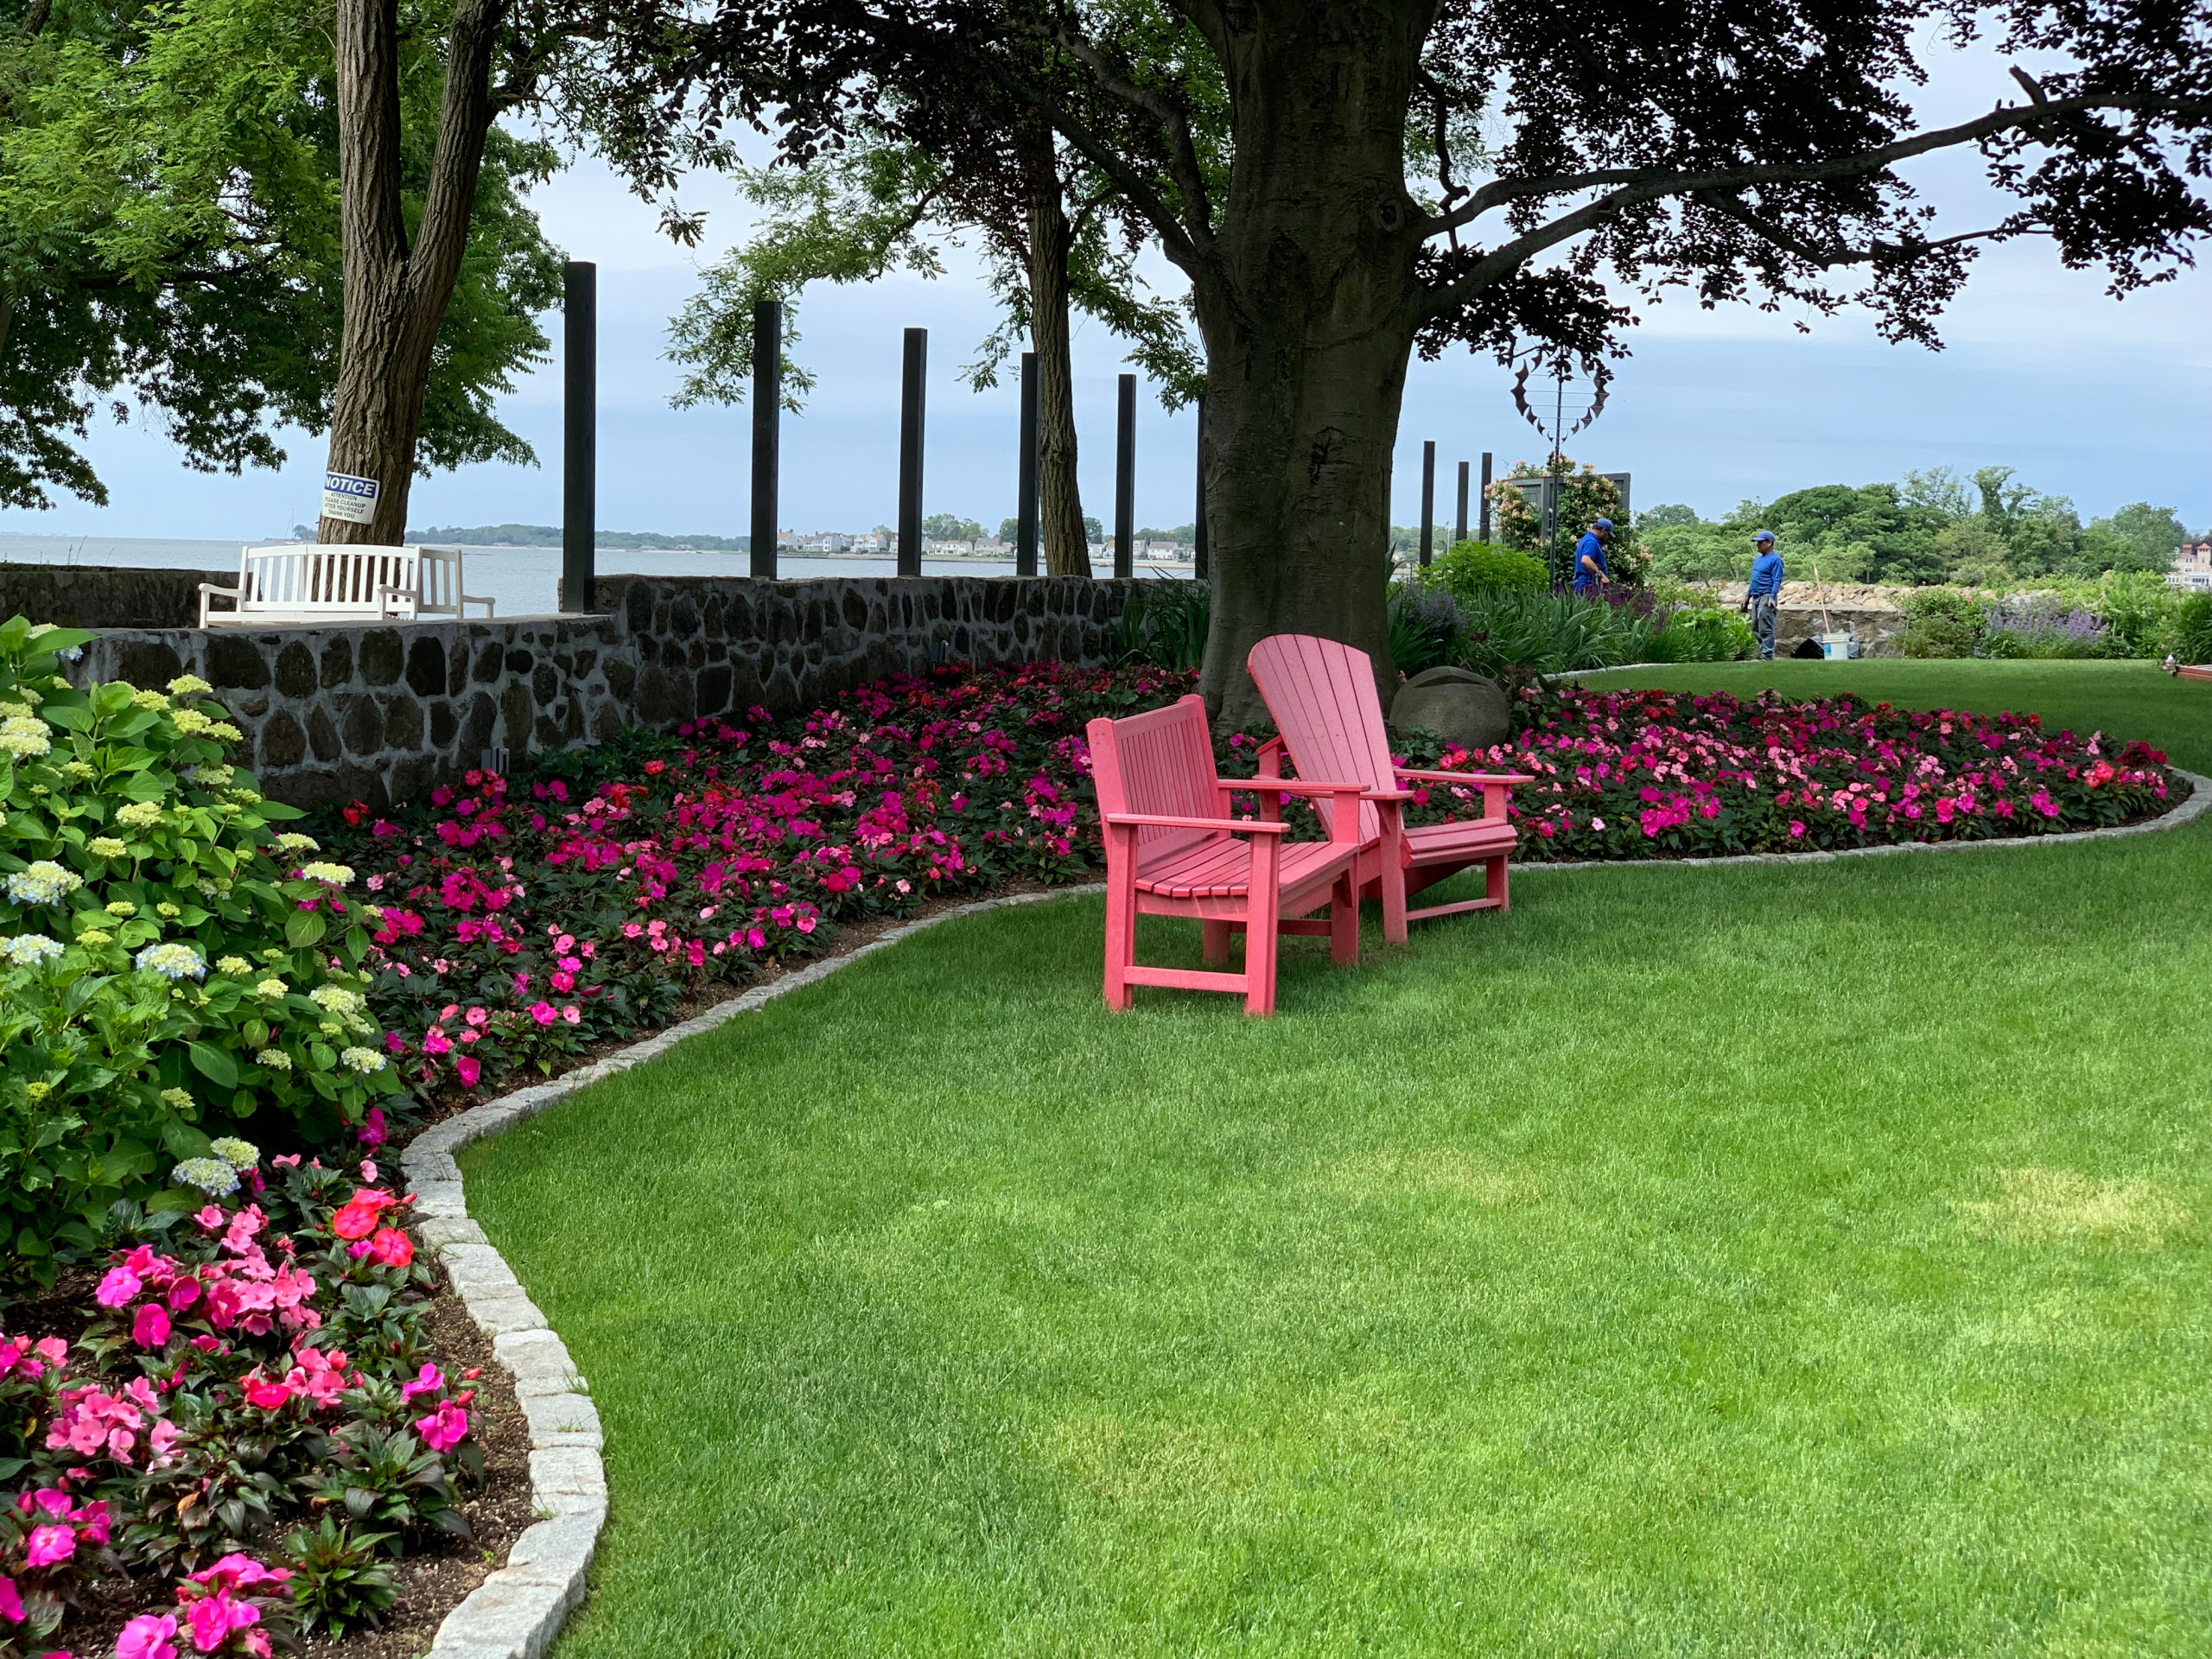 Summer Annuals planted on Estate in Stamford, CT by Peter Atkins and Associates